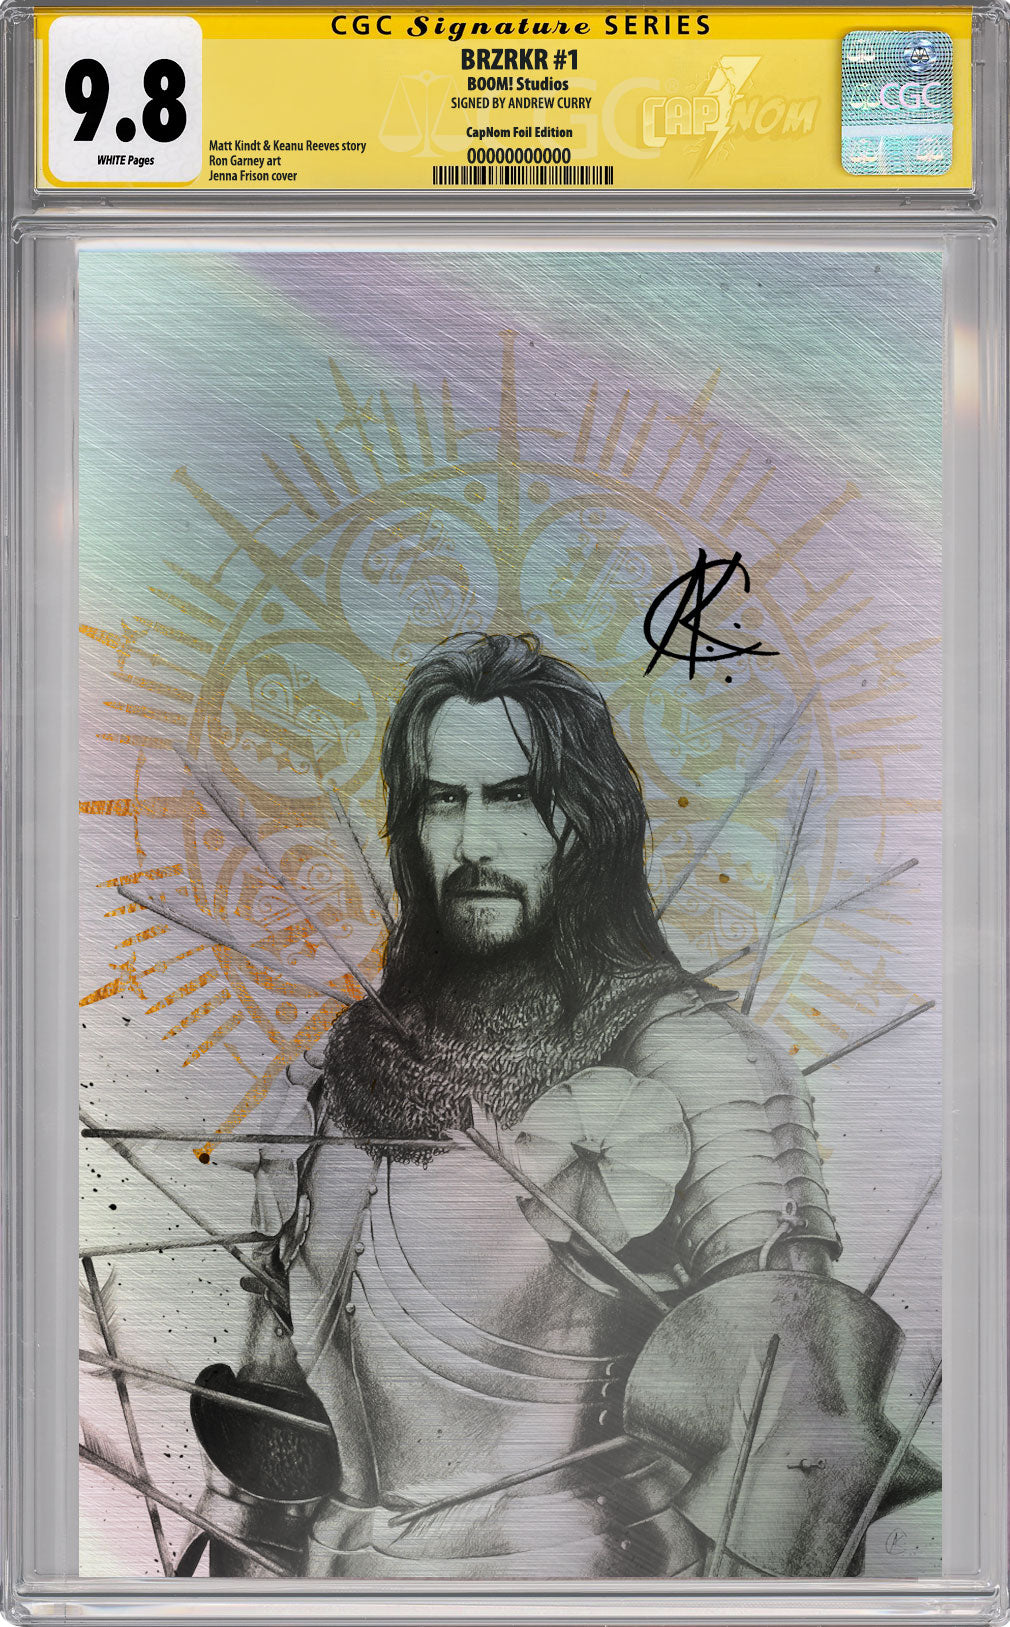 BRZRKR #1 PEN & INK FOIL COVER BY ANDREW K. CURRY CGC SIG SERIES SIGNED BY ANDREW K. CURRY